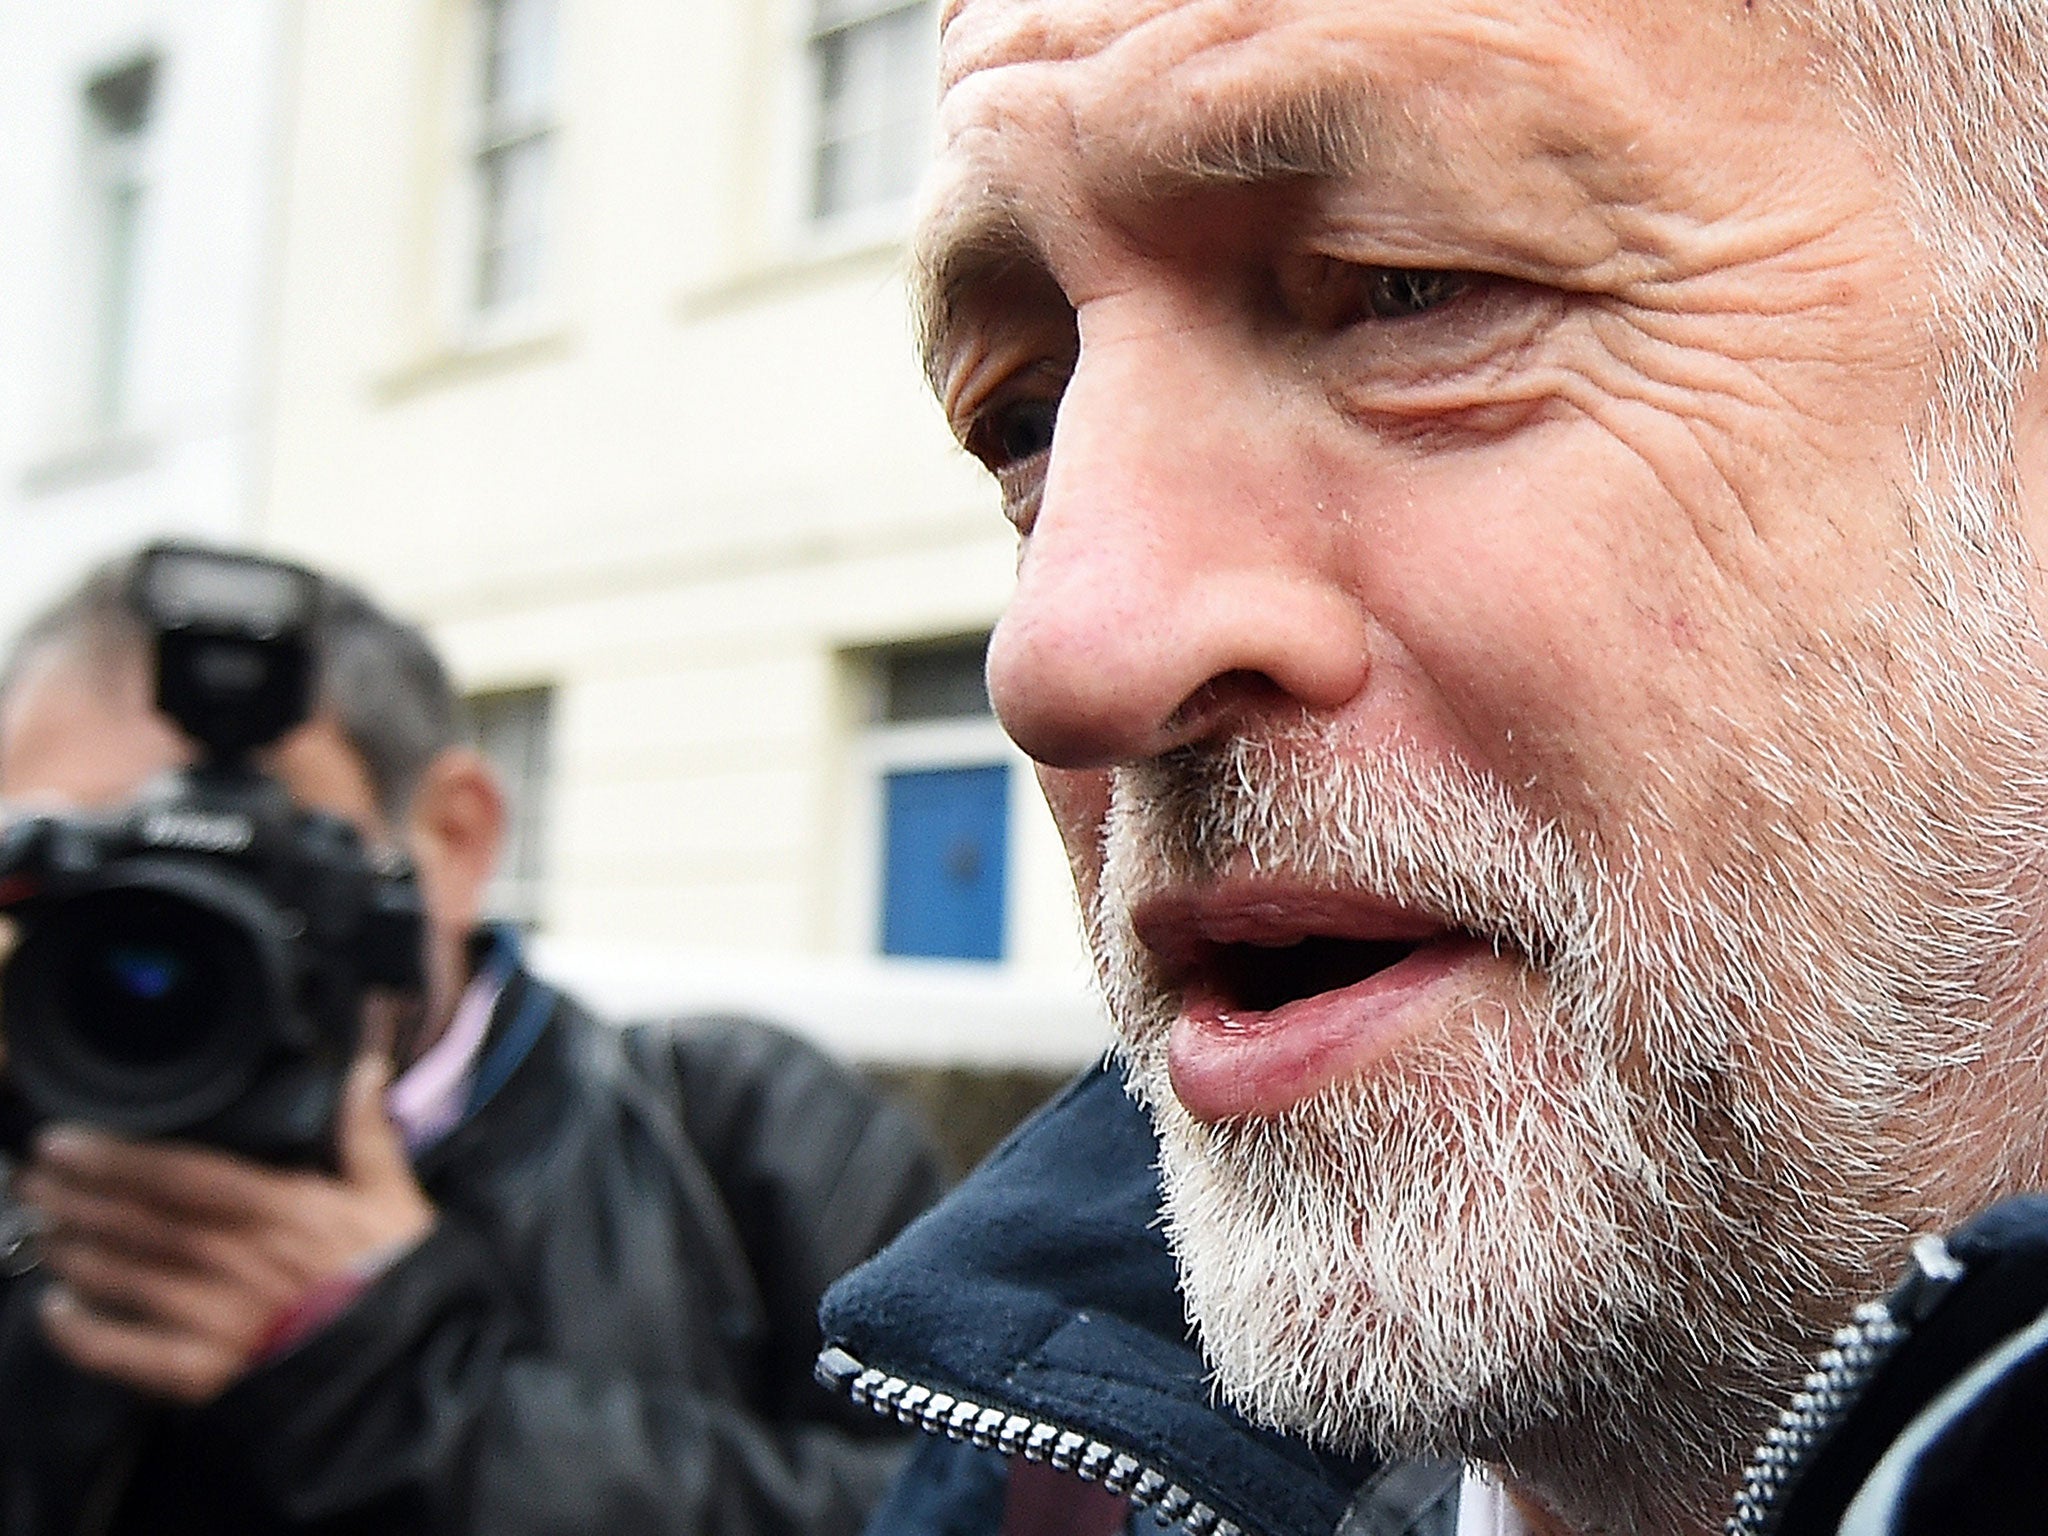 Labour Leader Jeremy Corbyn accused the Government of “launching an NHS news blackout” to keep the public in the dark